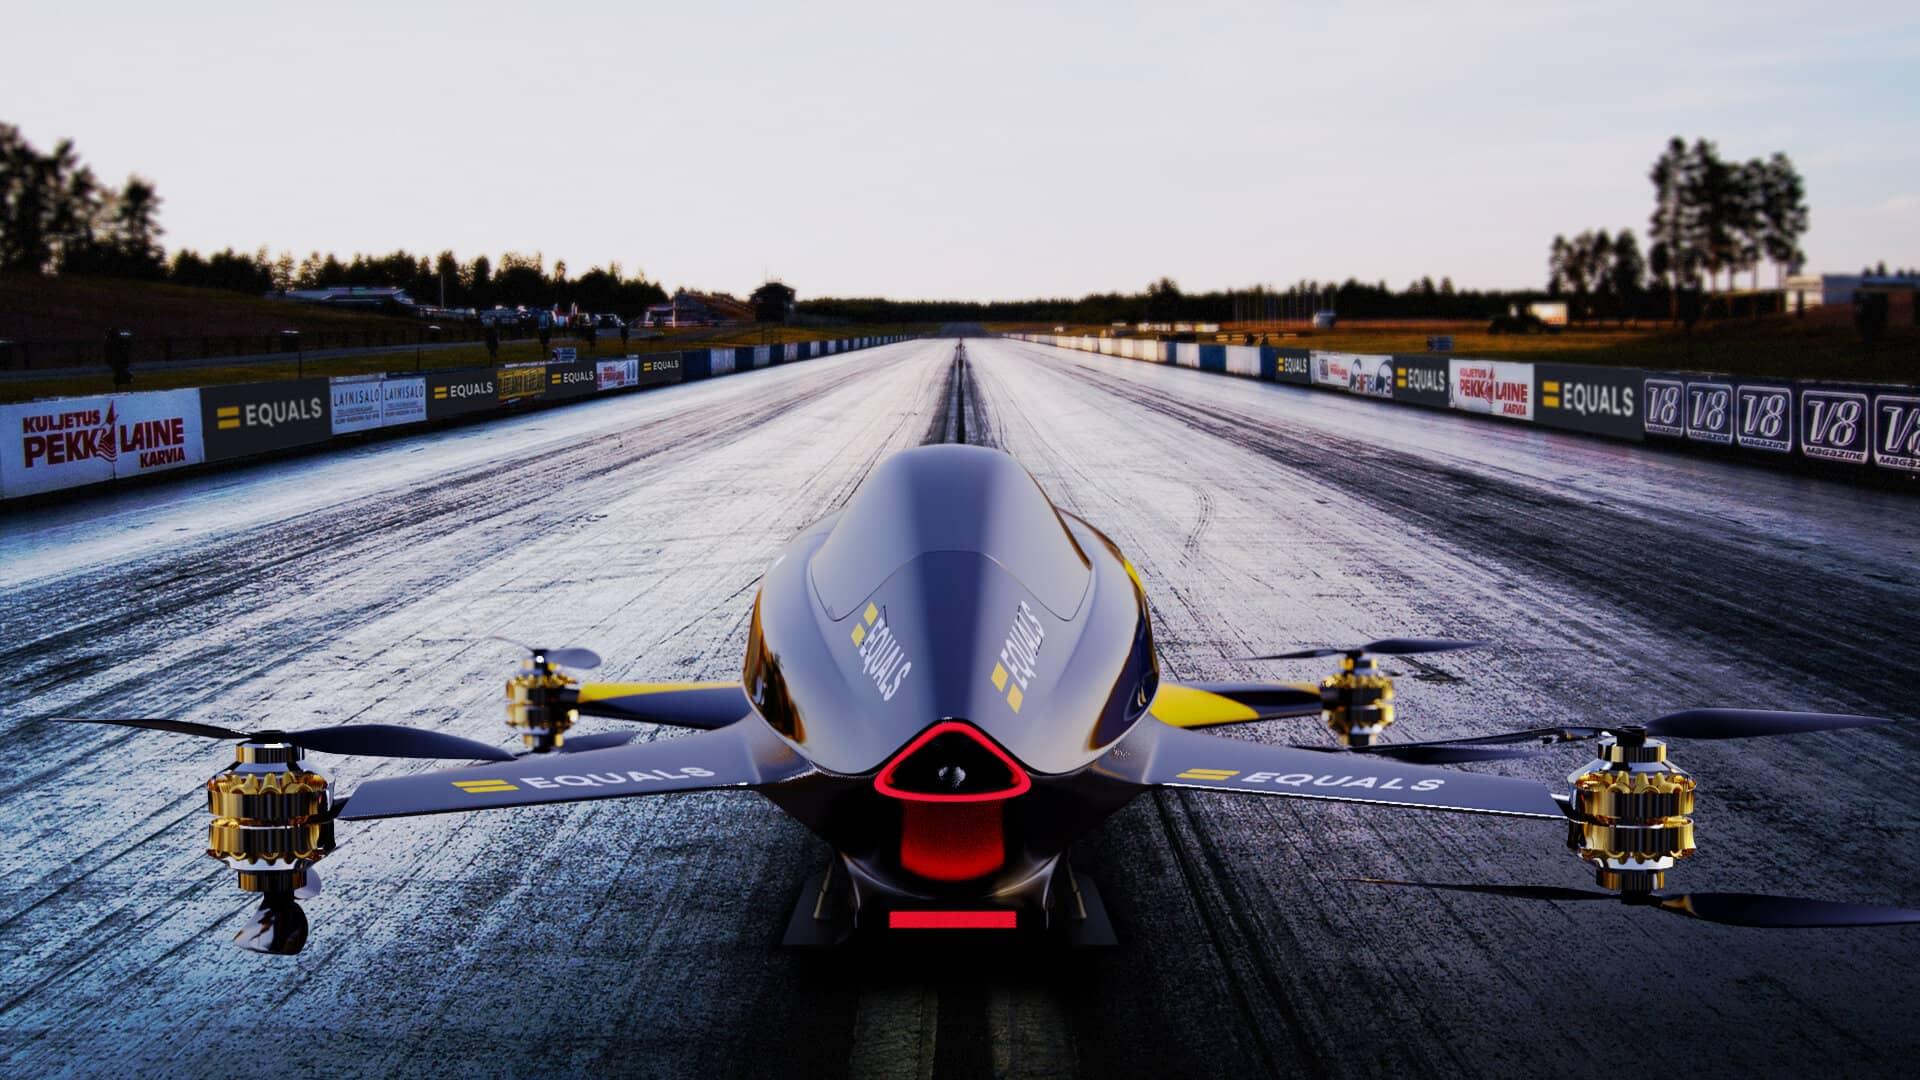 The Airspeeder - Literally taking the race from the tarmac to the sky